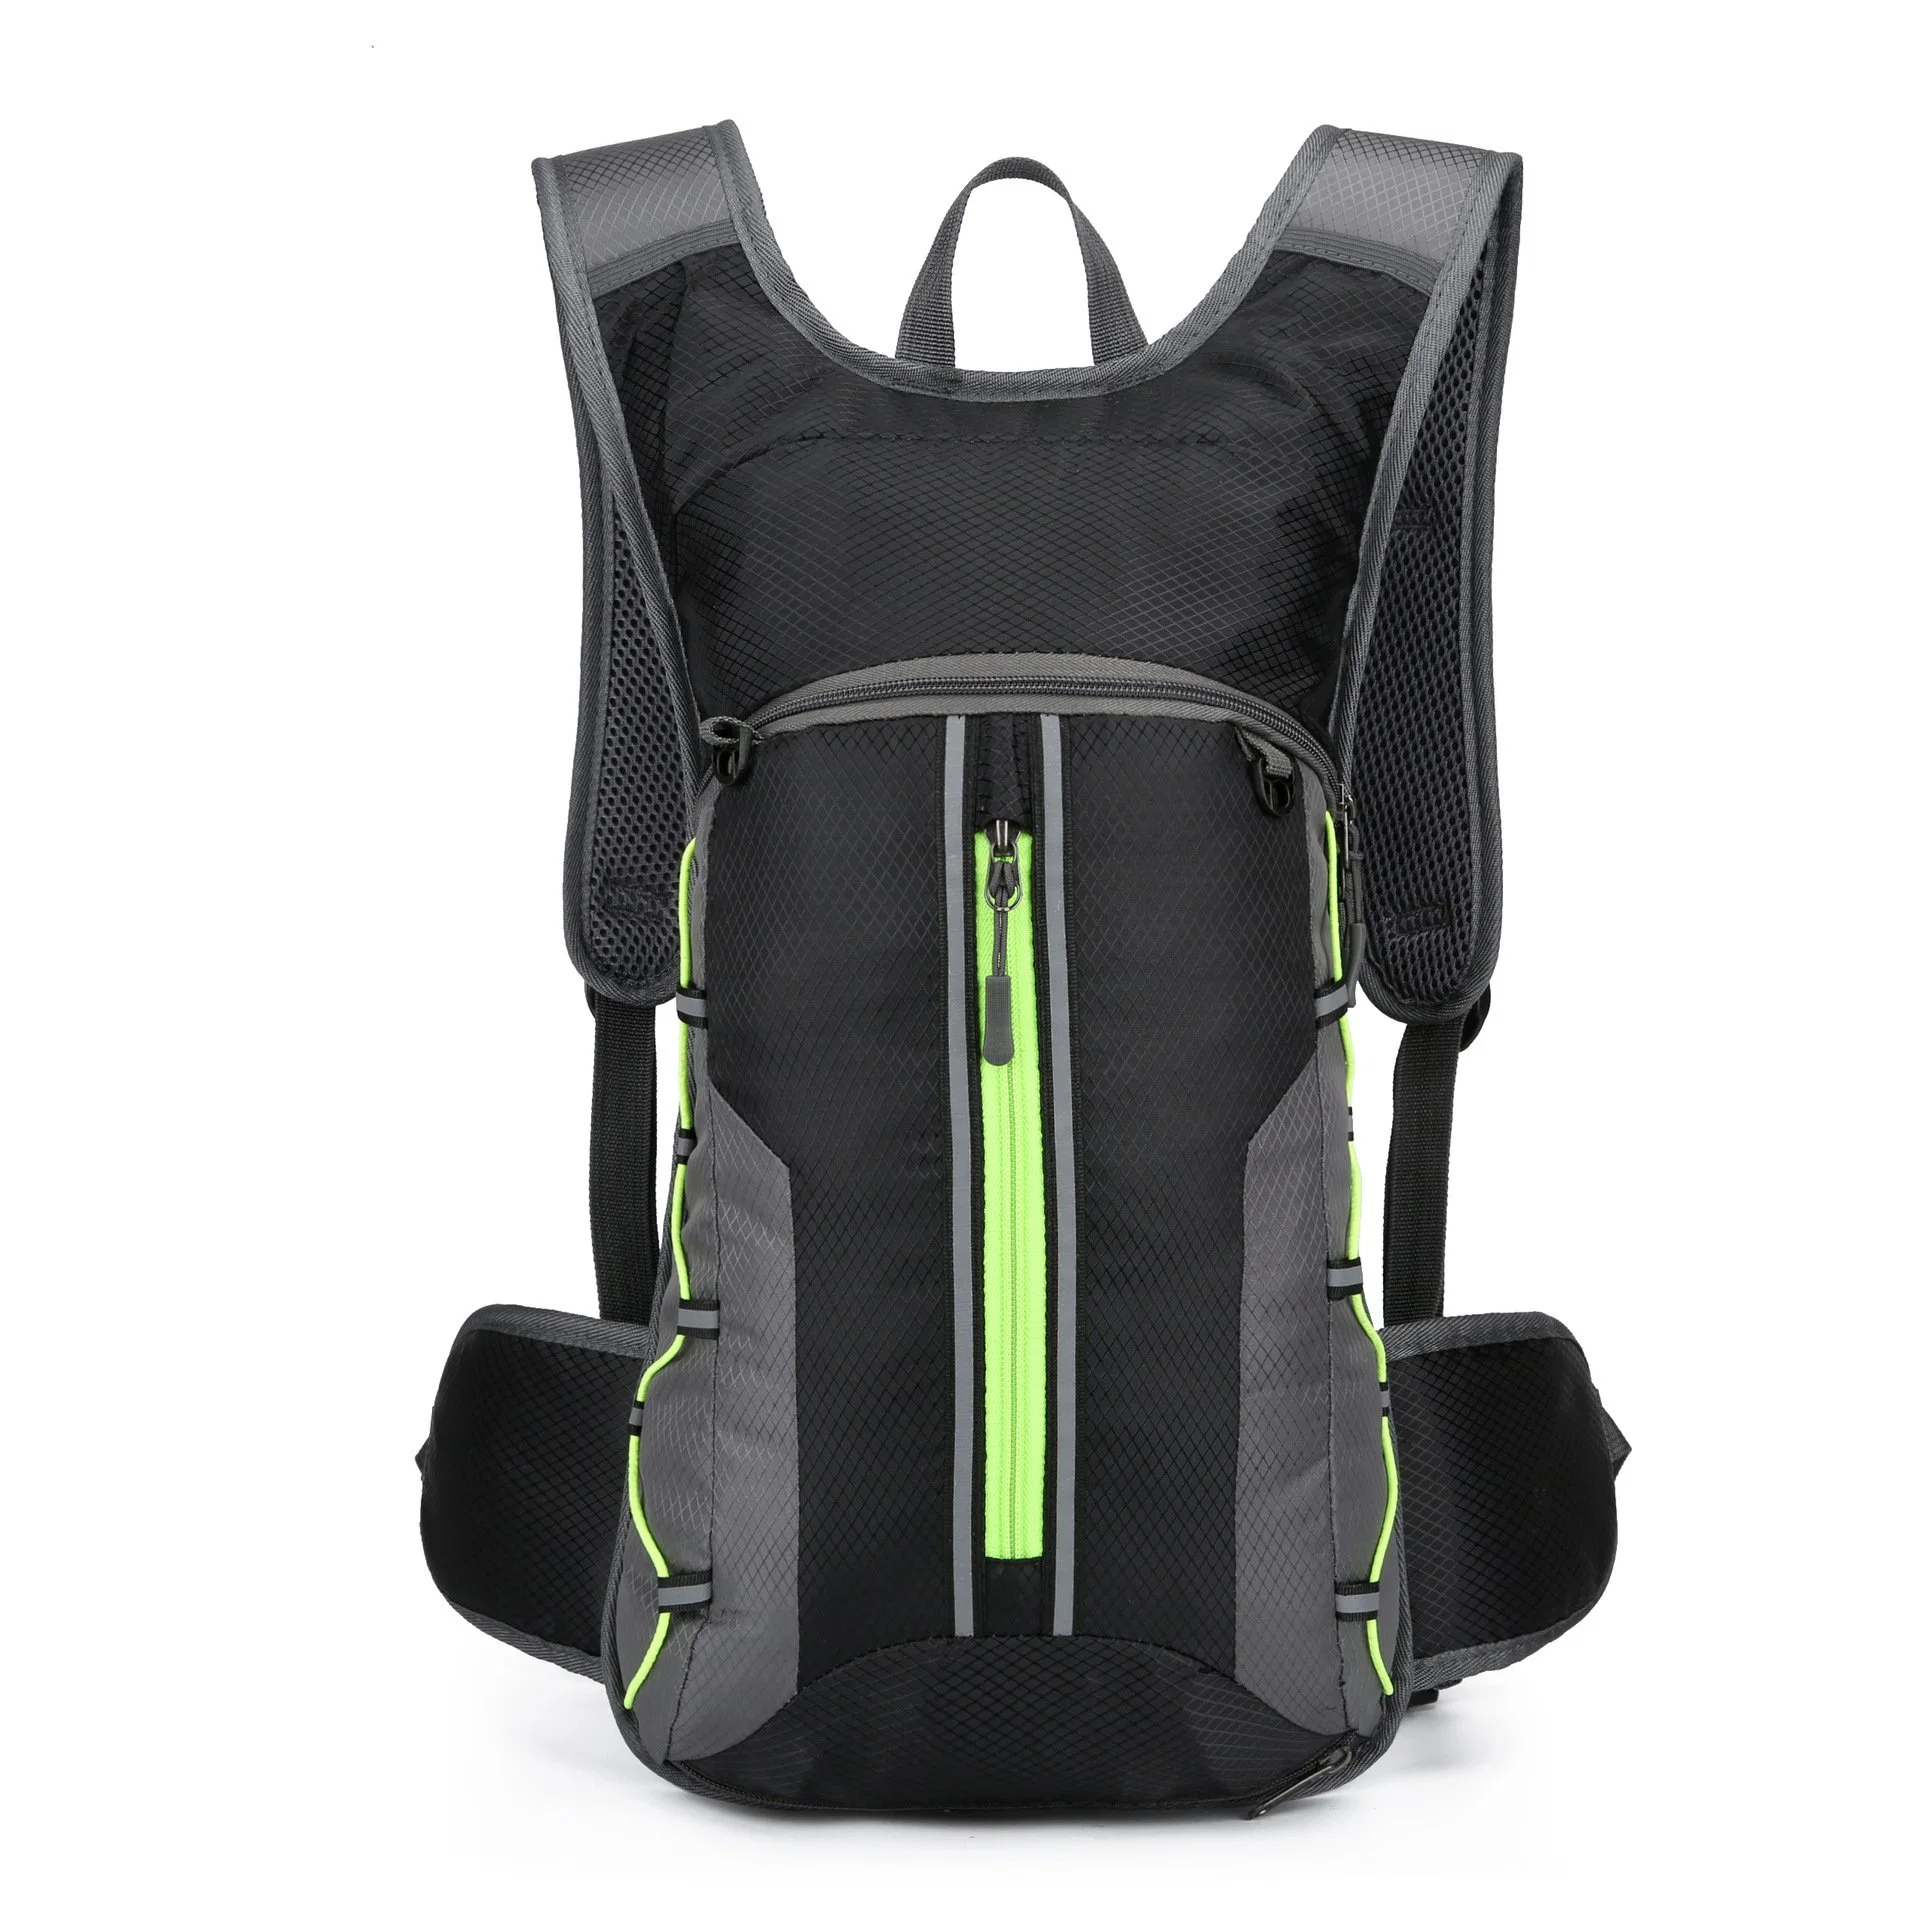 Custom Water Resistant Hydration Backpack Cycling Running Bag with Drinking Bladder